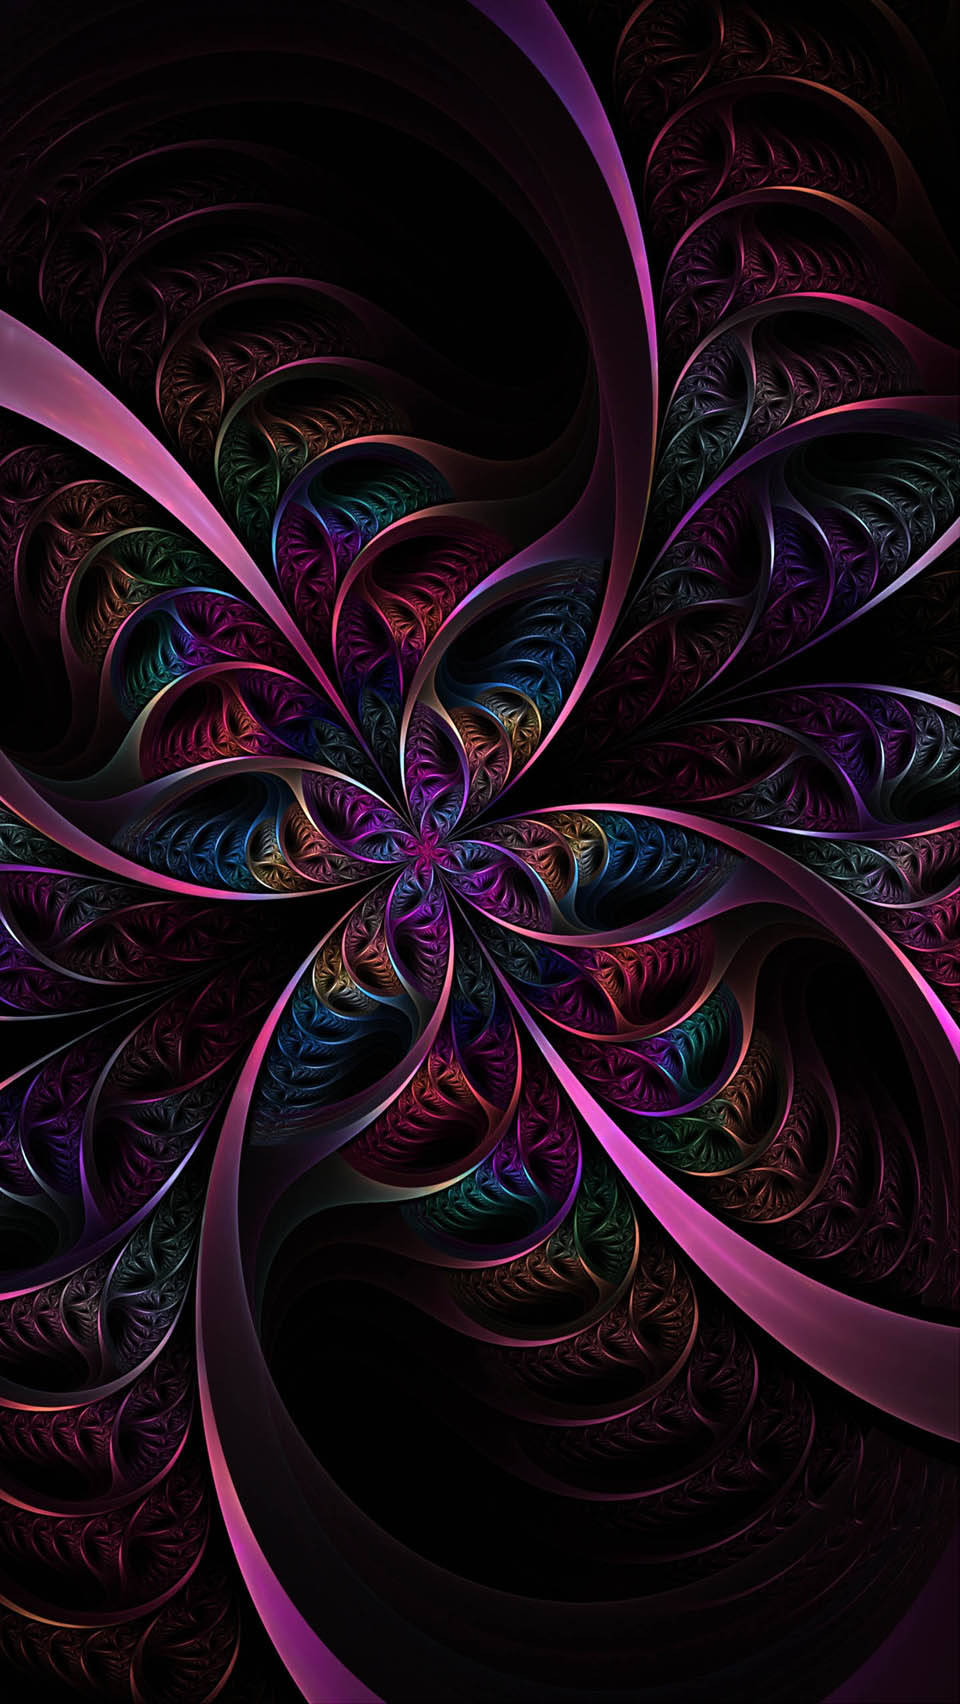 Enigmatic Psychedelic Art For Iphone Wallpaper